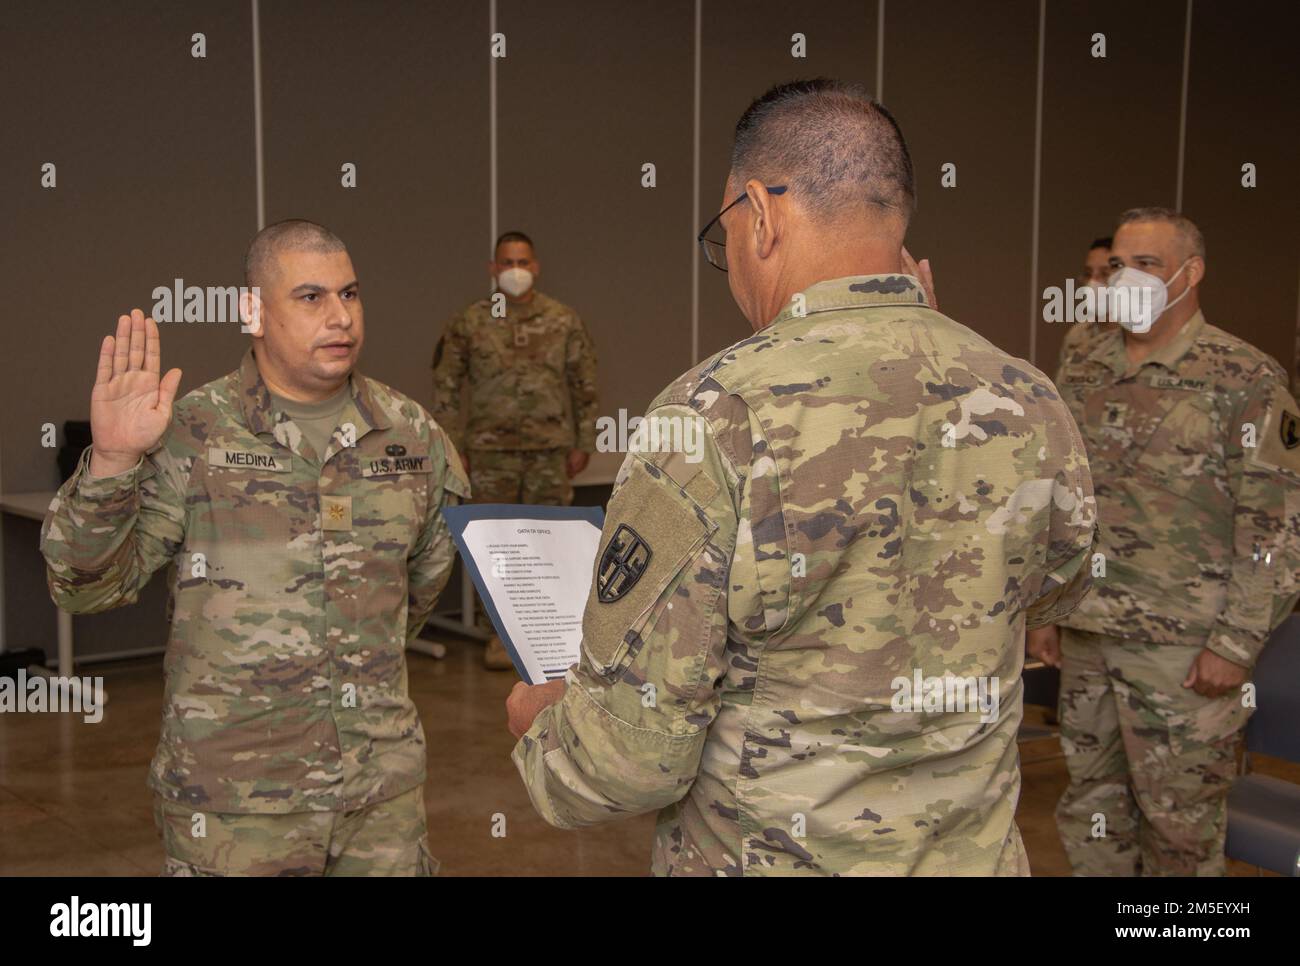 Colonel Víctor Pérez, commander of the Joint Task Force - Puerto Rico, administers the oath of office to Maj. Luis E. Medina at Fort Buchanan, Puerto Rico, March 9, 2022. The Puerto Rico Army National Guard requires capable and effective officers to lead and instruct our soldiers in the day-to-day operations. Stock Photo